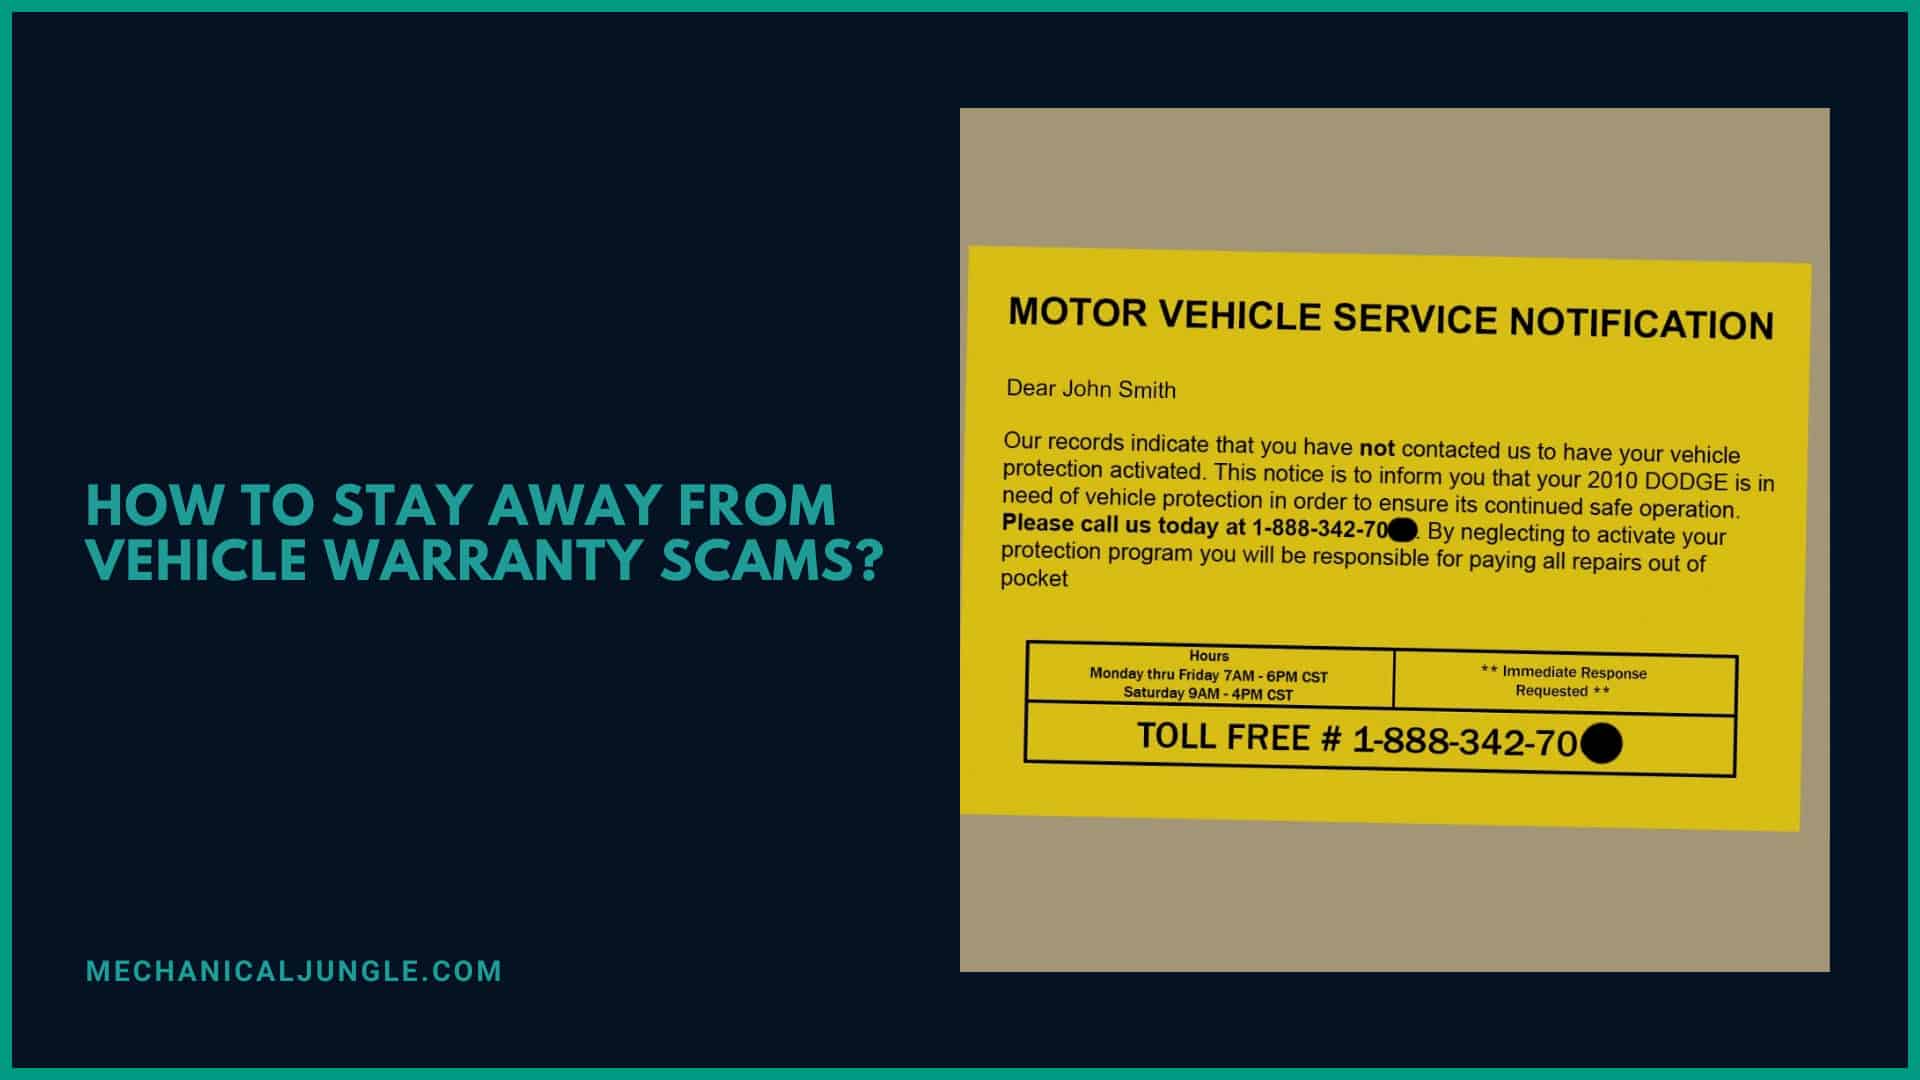 How to Stay Away from Vehicle Warranty Scams?